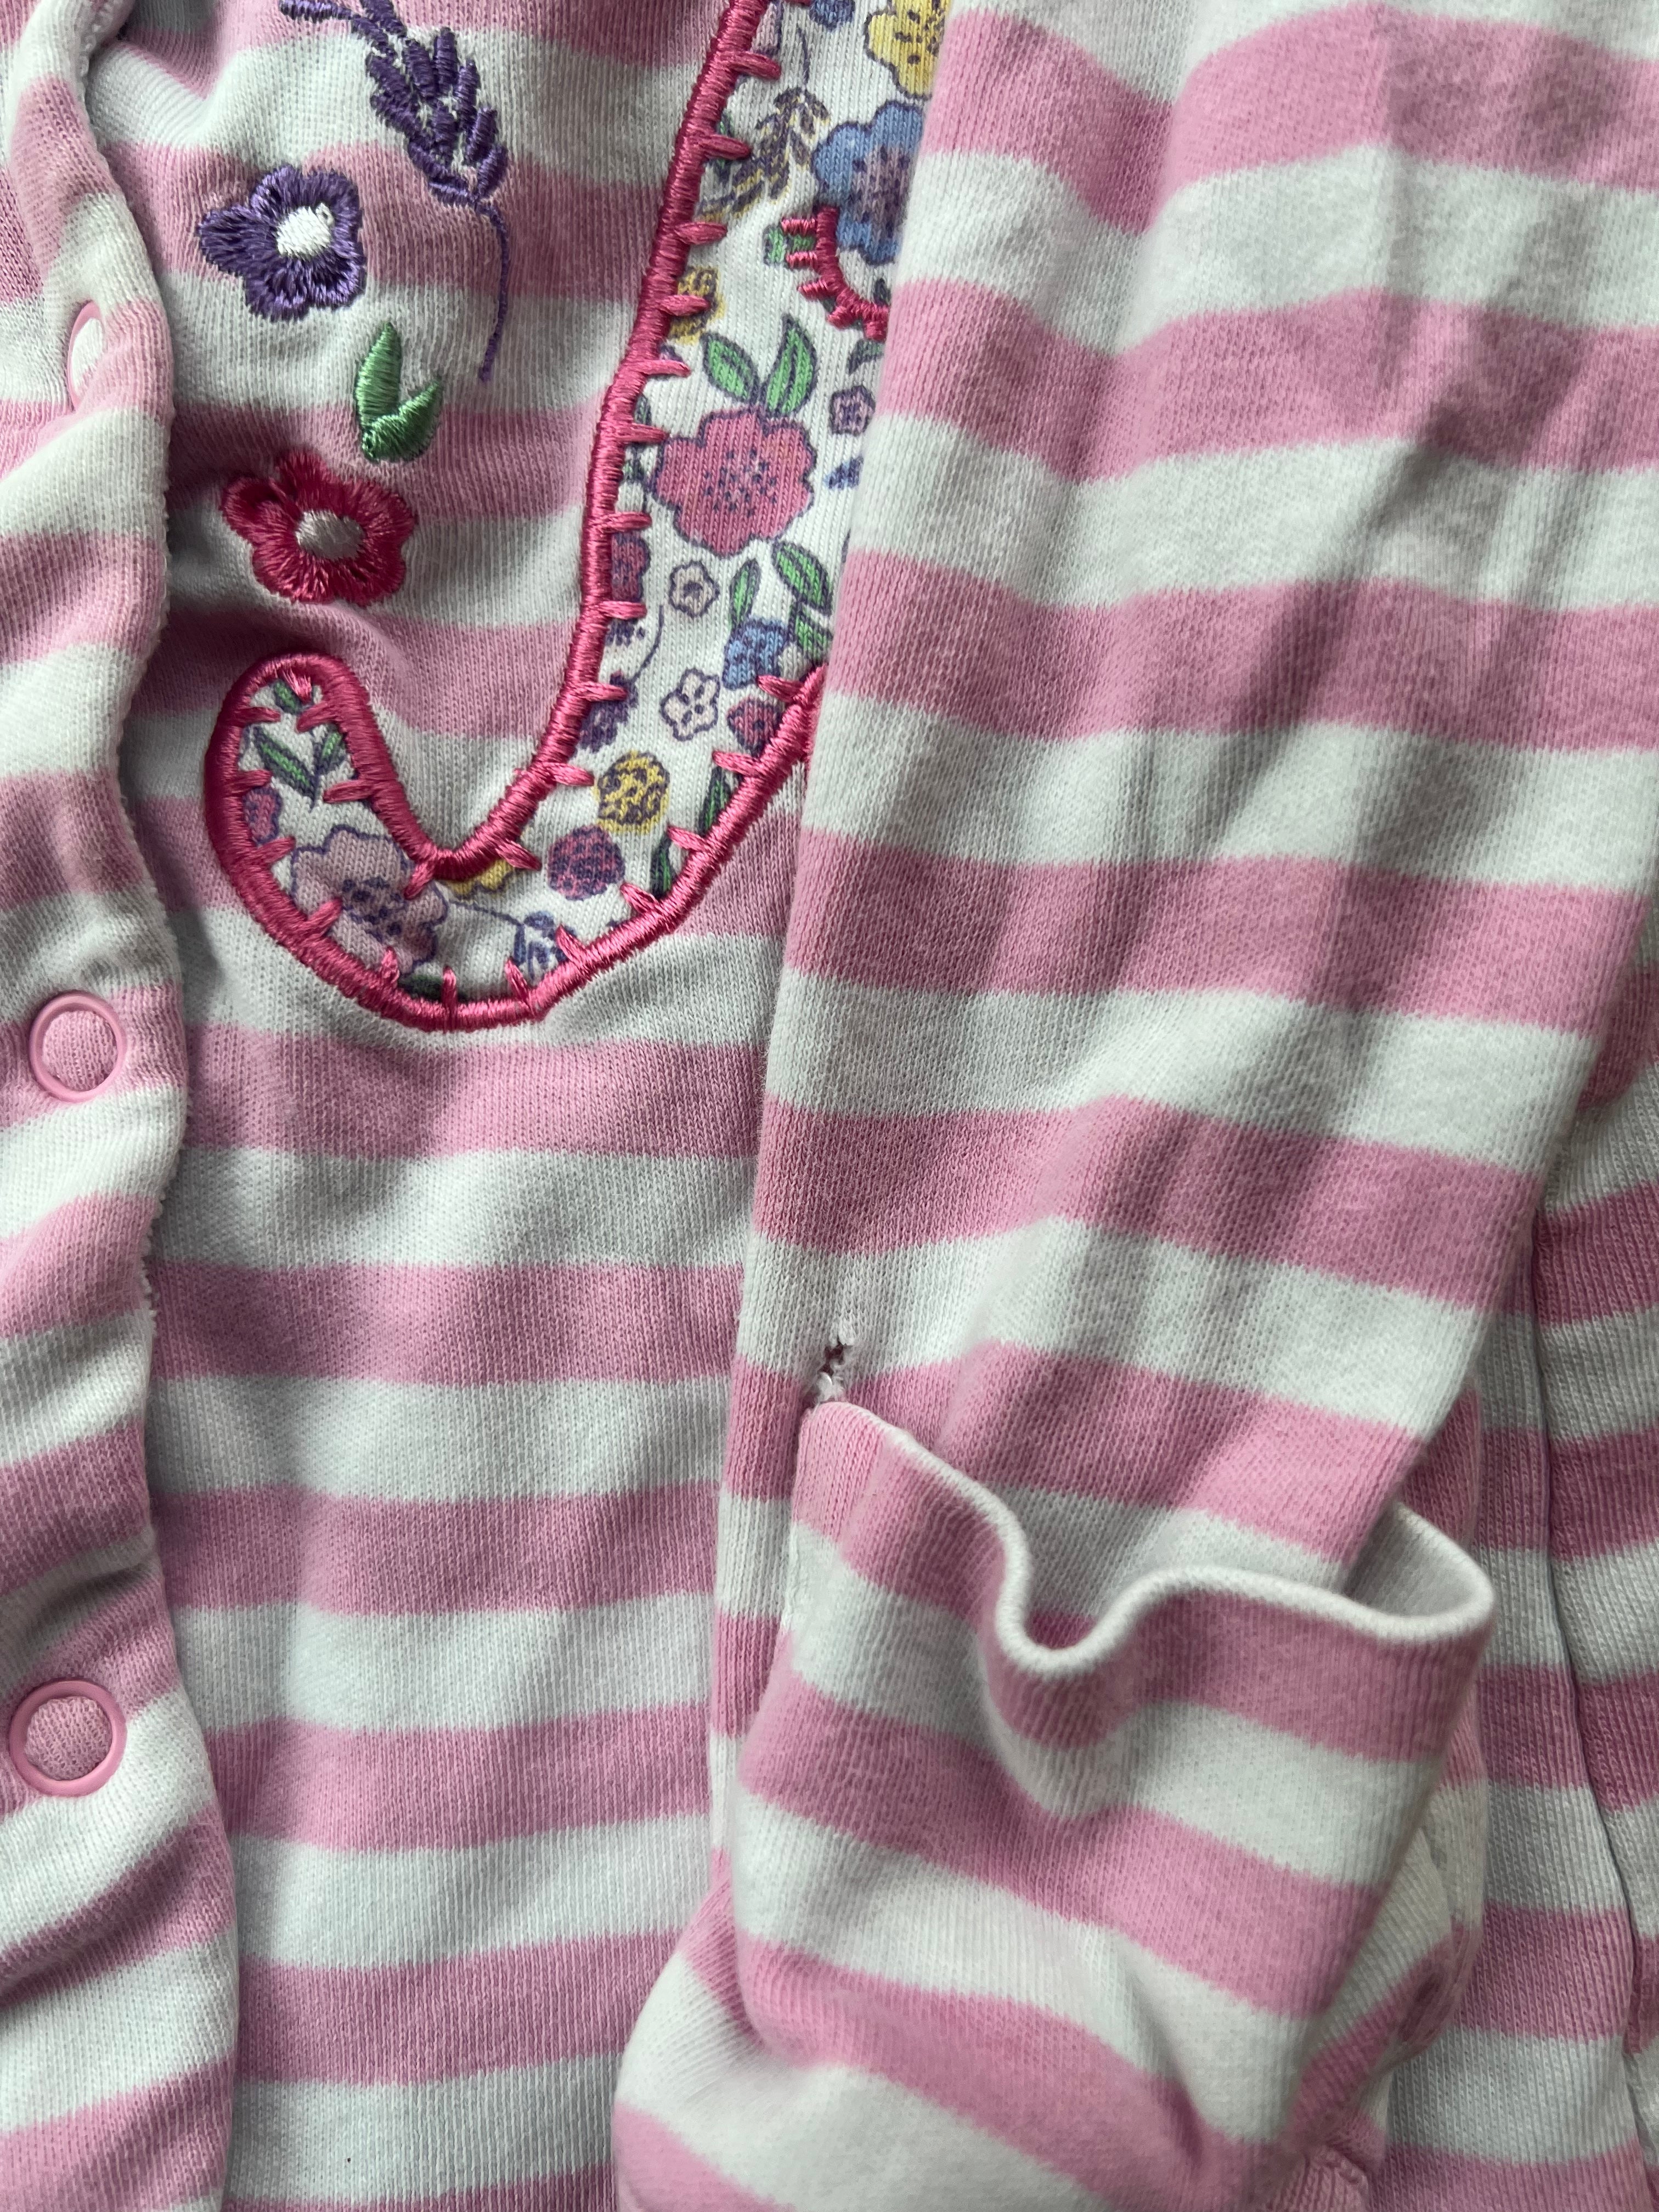 Striped Footless Baby Grow with Floral Elephant Applique tiny hole